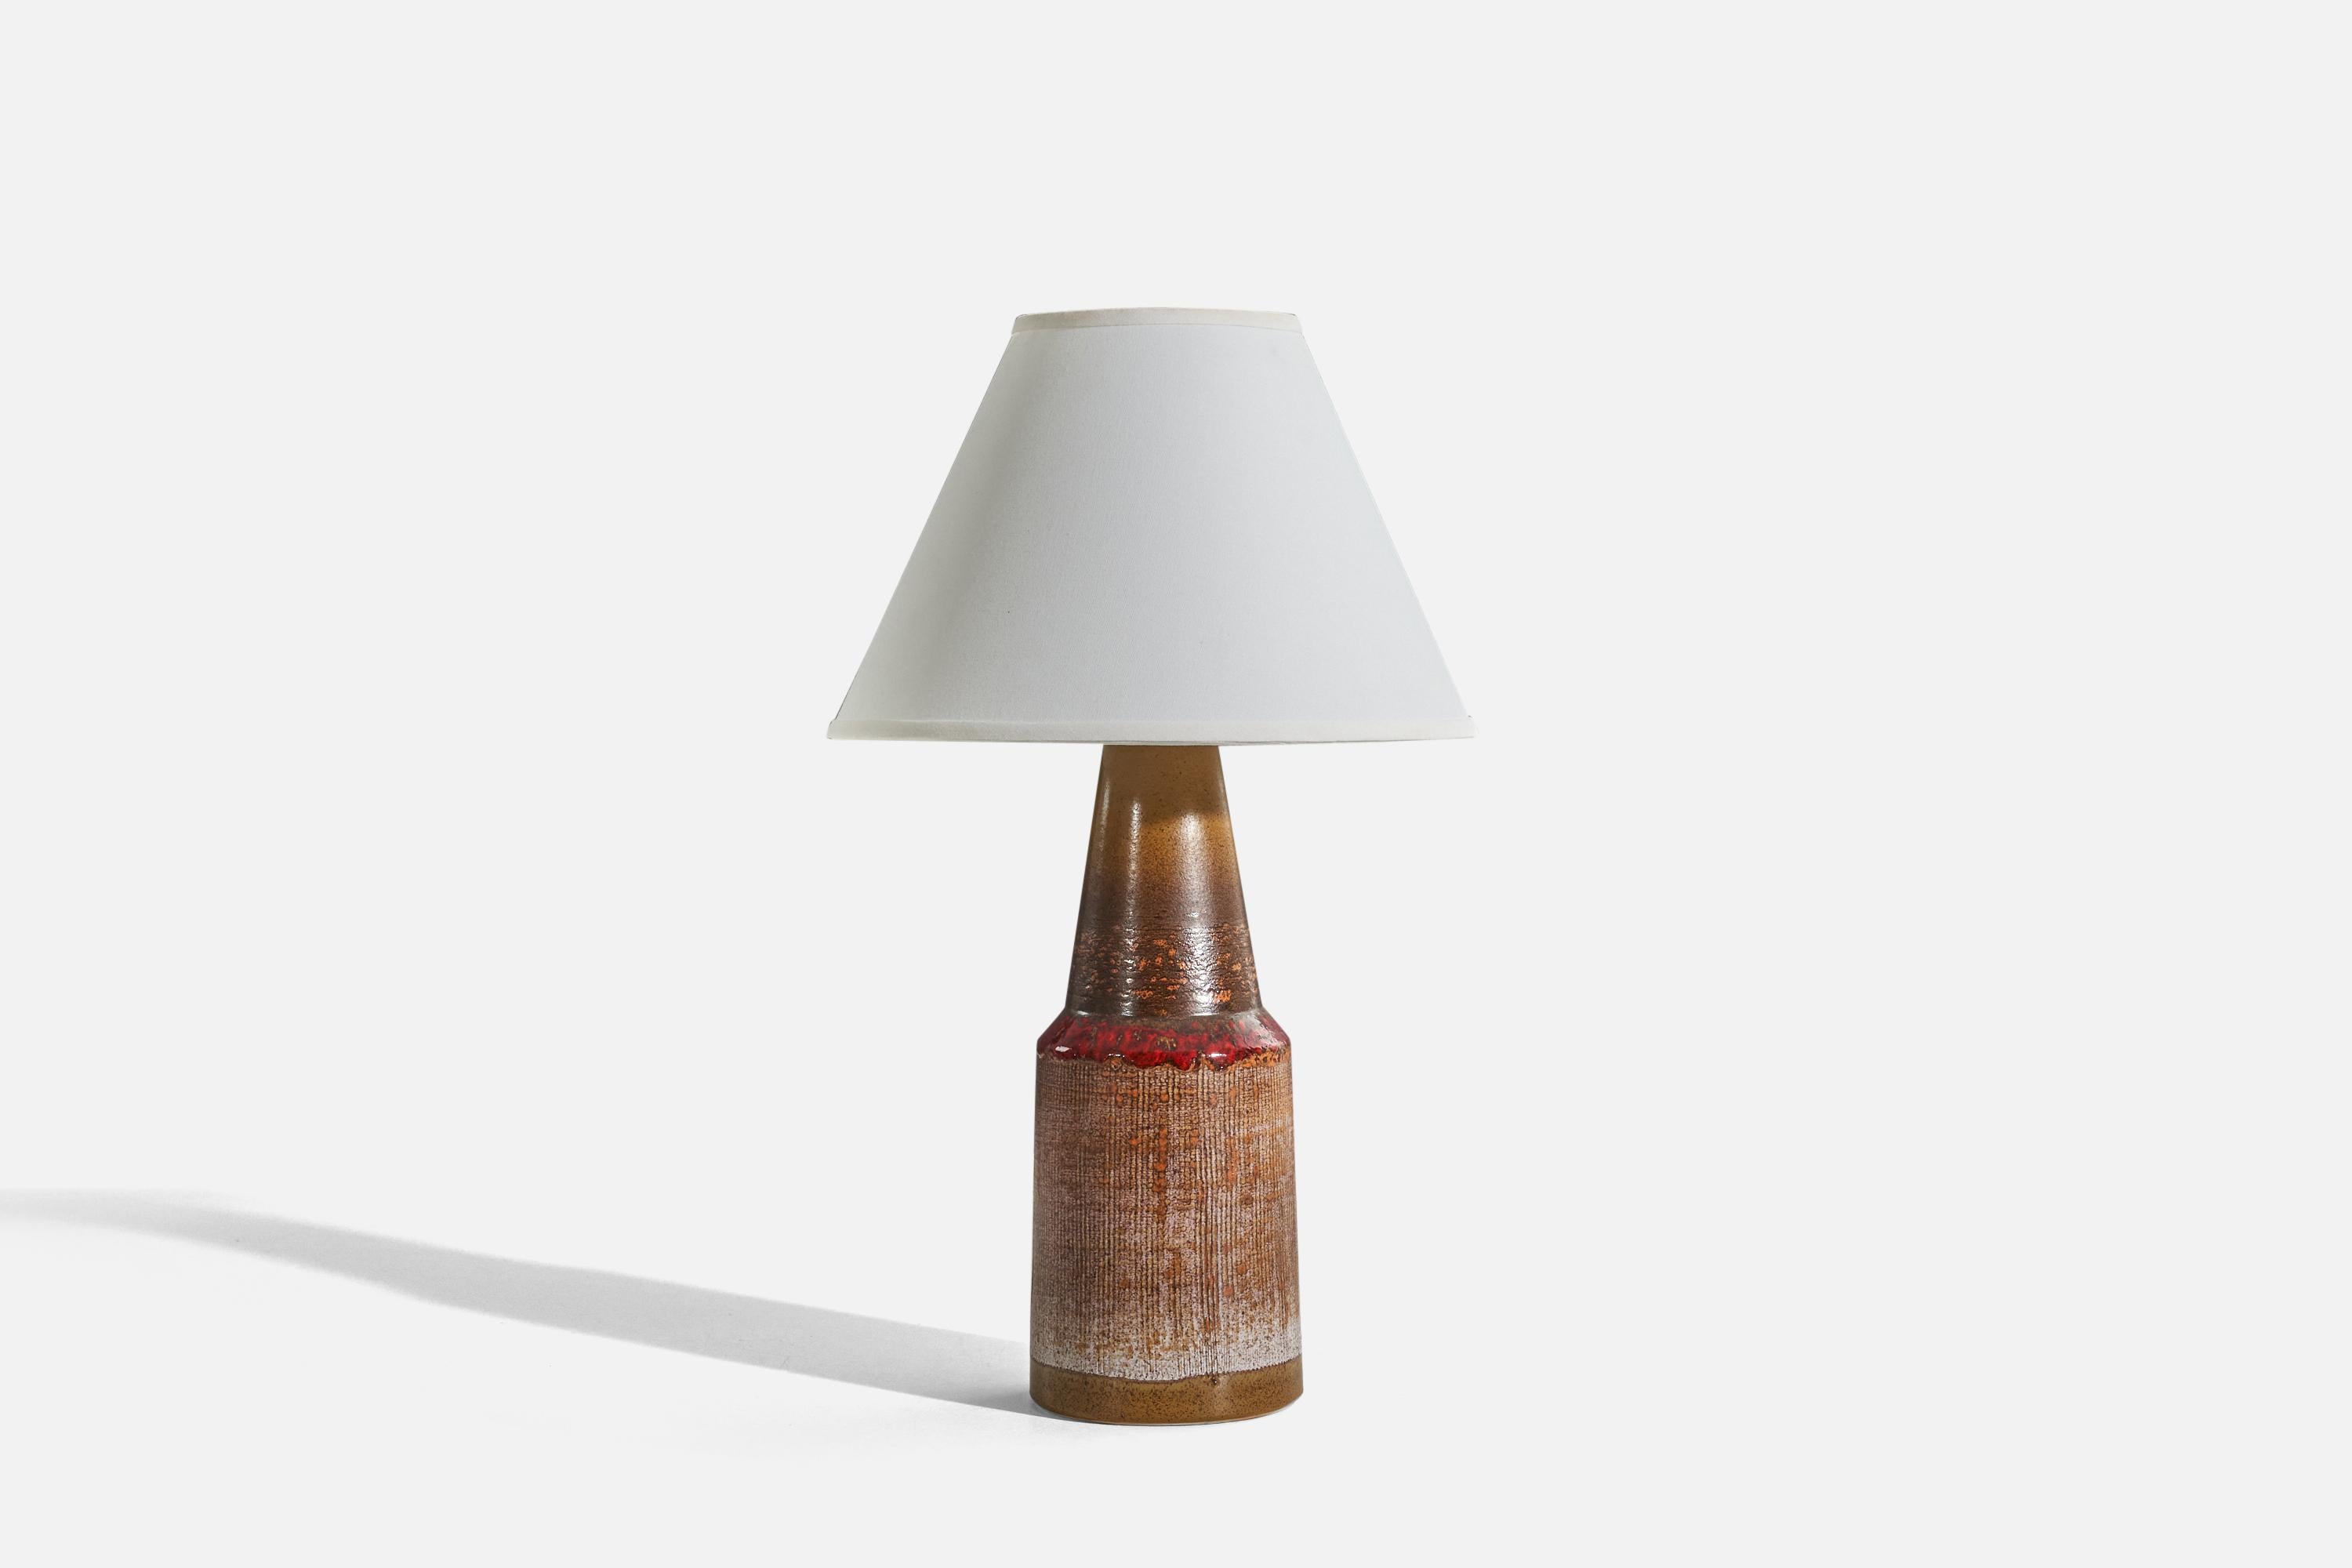 A brown, glazed stoneware table lamp designed and produced by Tilgmans Keramik, Sweden, 1960s. 

Sold without lampshade. 
Dimensions of Lamp (inches) : 16.62 x 5.25 x 5.25 (H x W x D)
Dimensions of Shade (inches) : 5 x 12.25 x 8.75 (T x B x